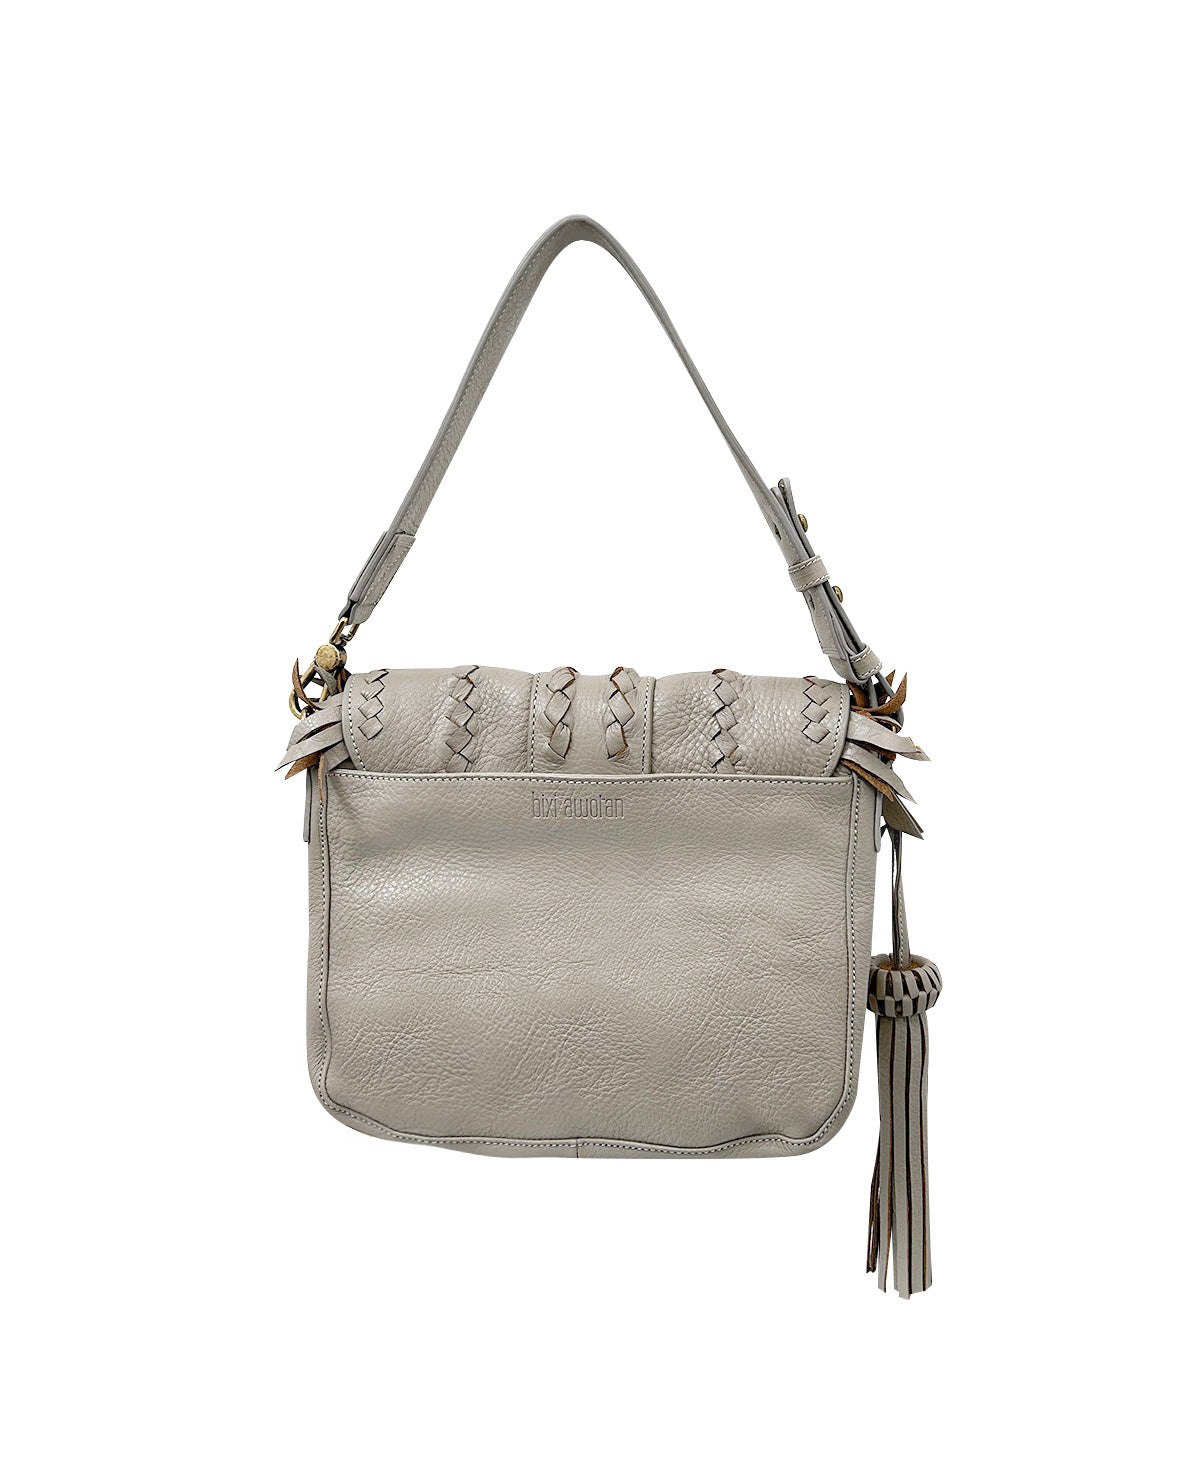 Gray/Taupe SENECA Leather Bag with Braids & Frings Details